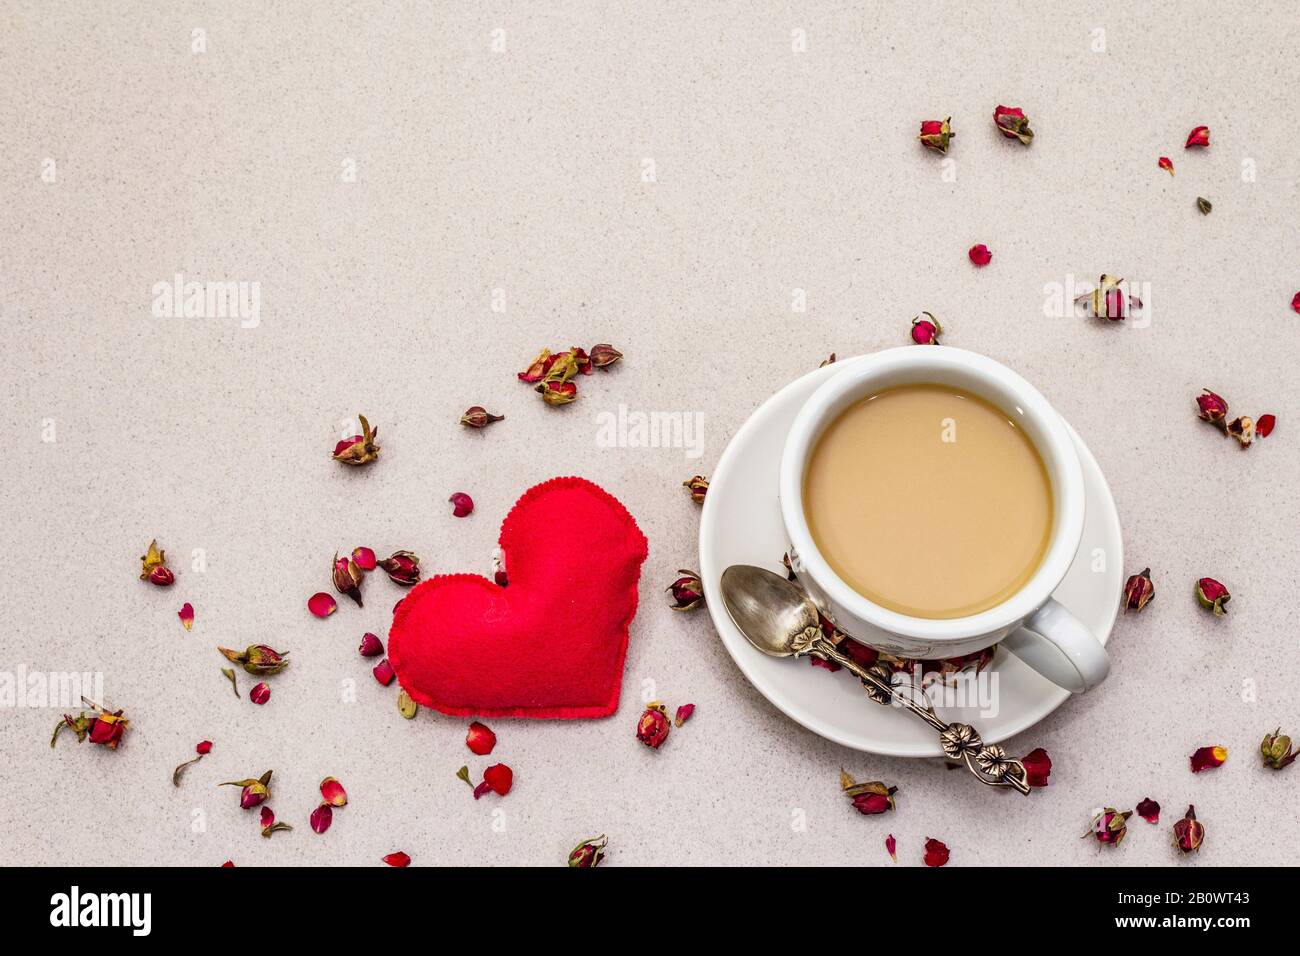 Good morning. Cup of coffee, rose buds and petals, red felt heart ...